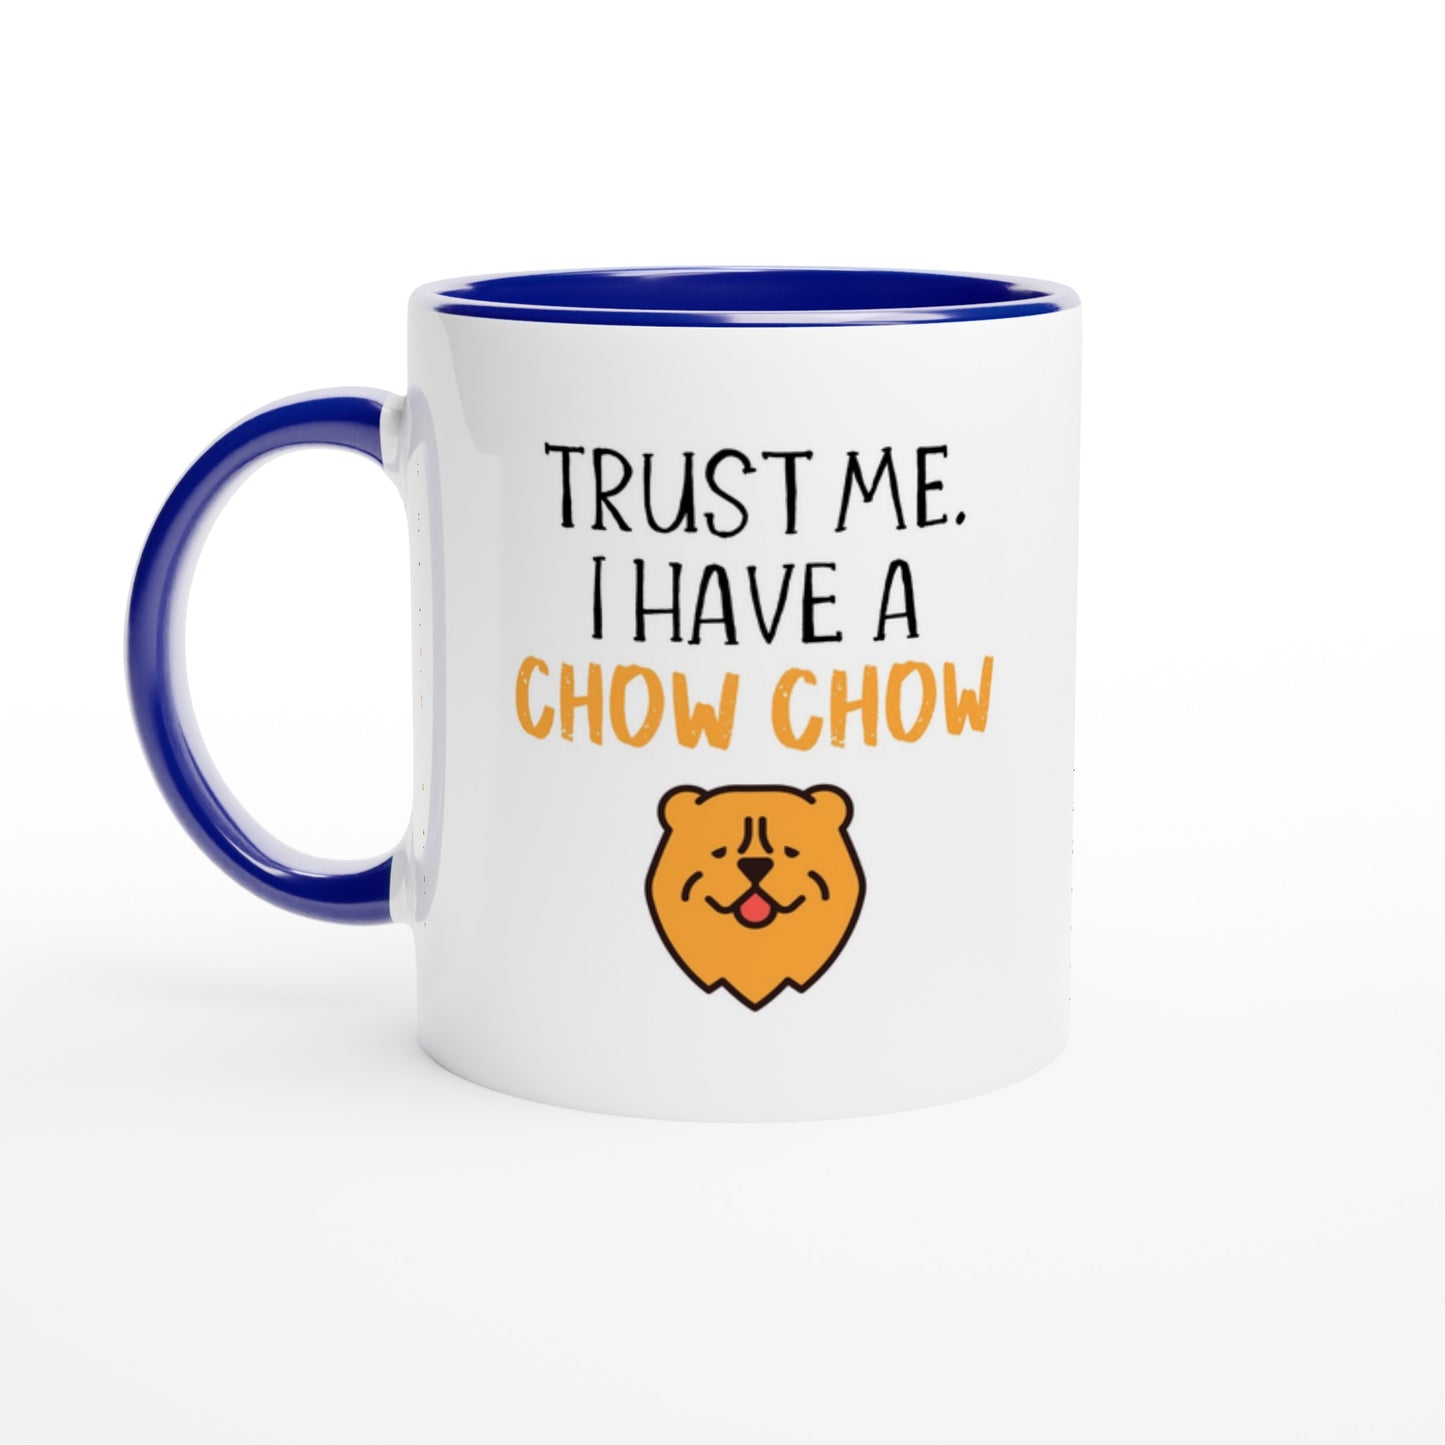 A coffee mug with the slogan: "Trust Me. I have a Chow Chow". Handle and inside Color is blue